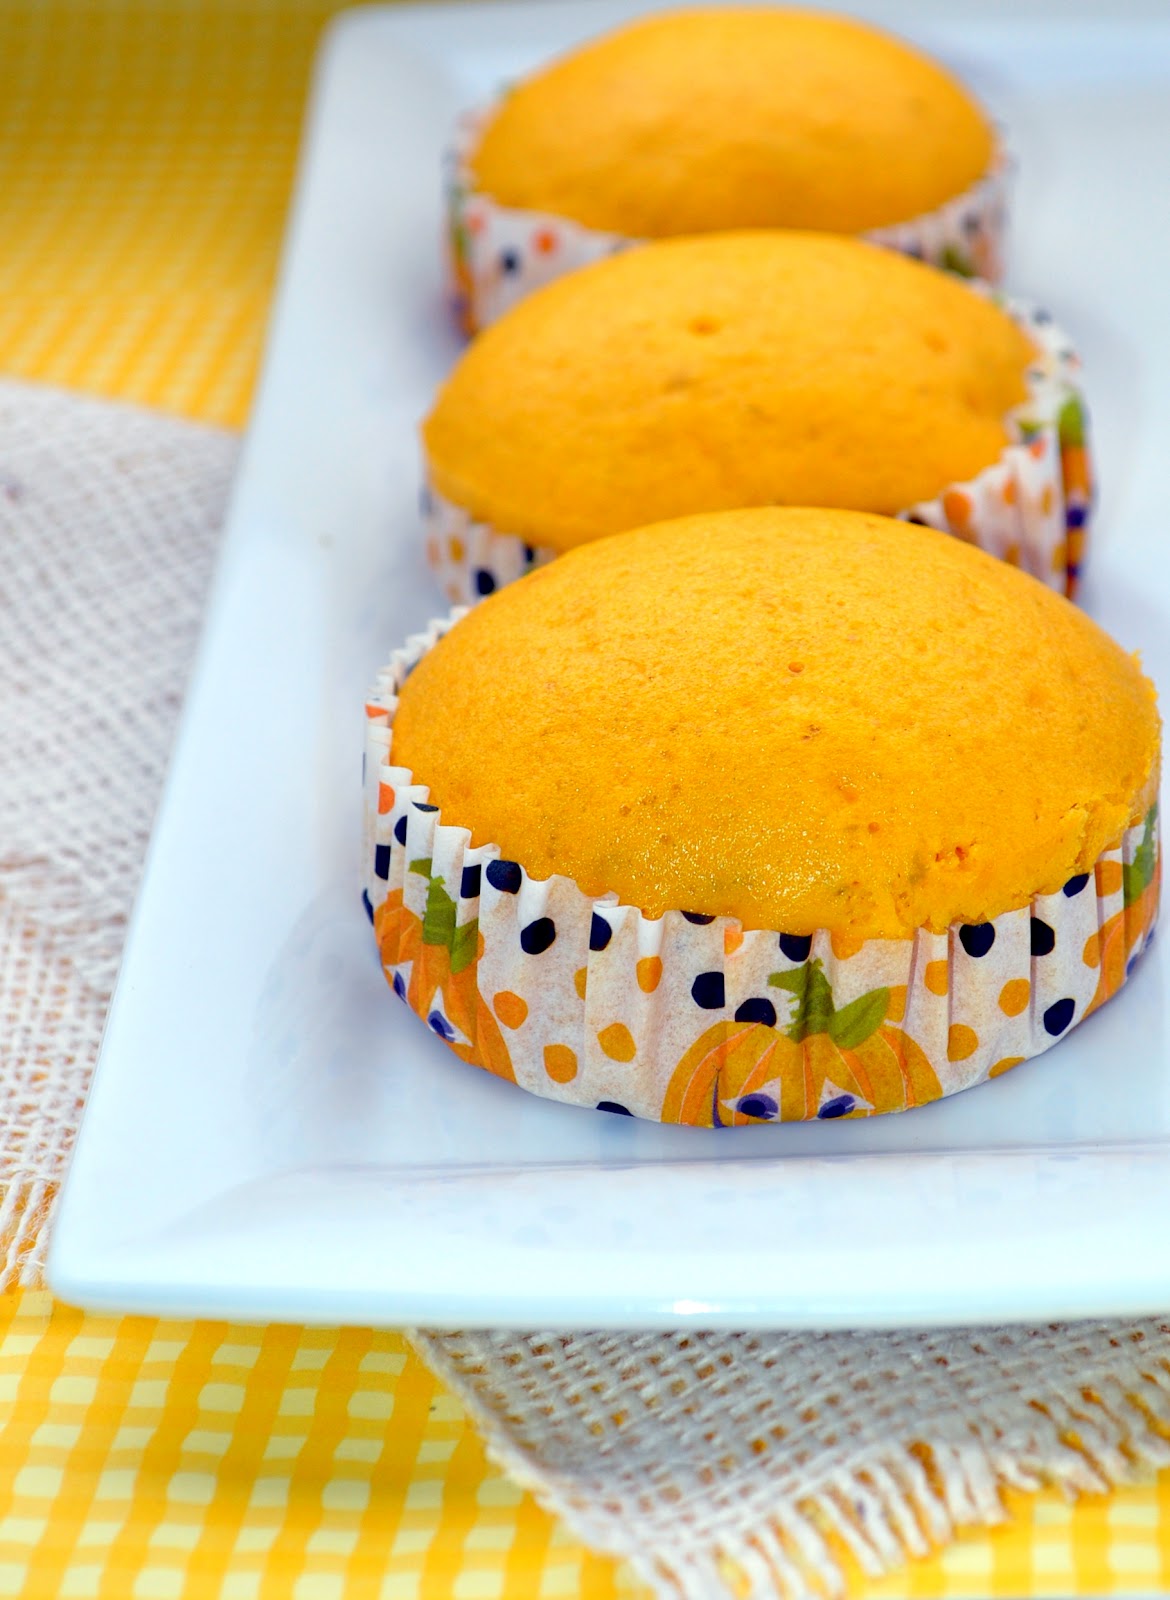 Life Scoops: Steamed Mango Muffin